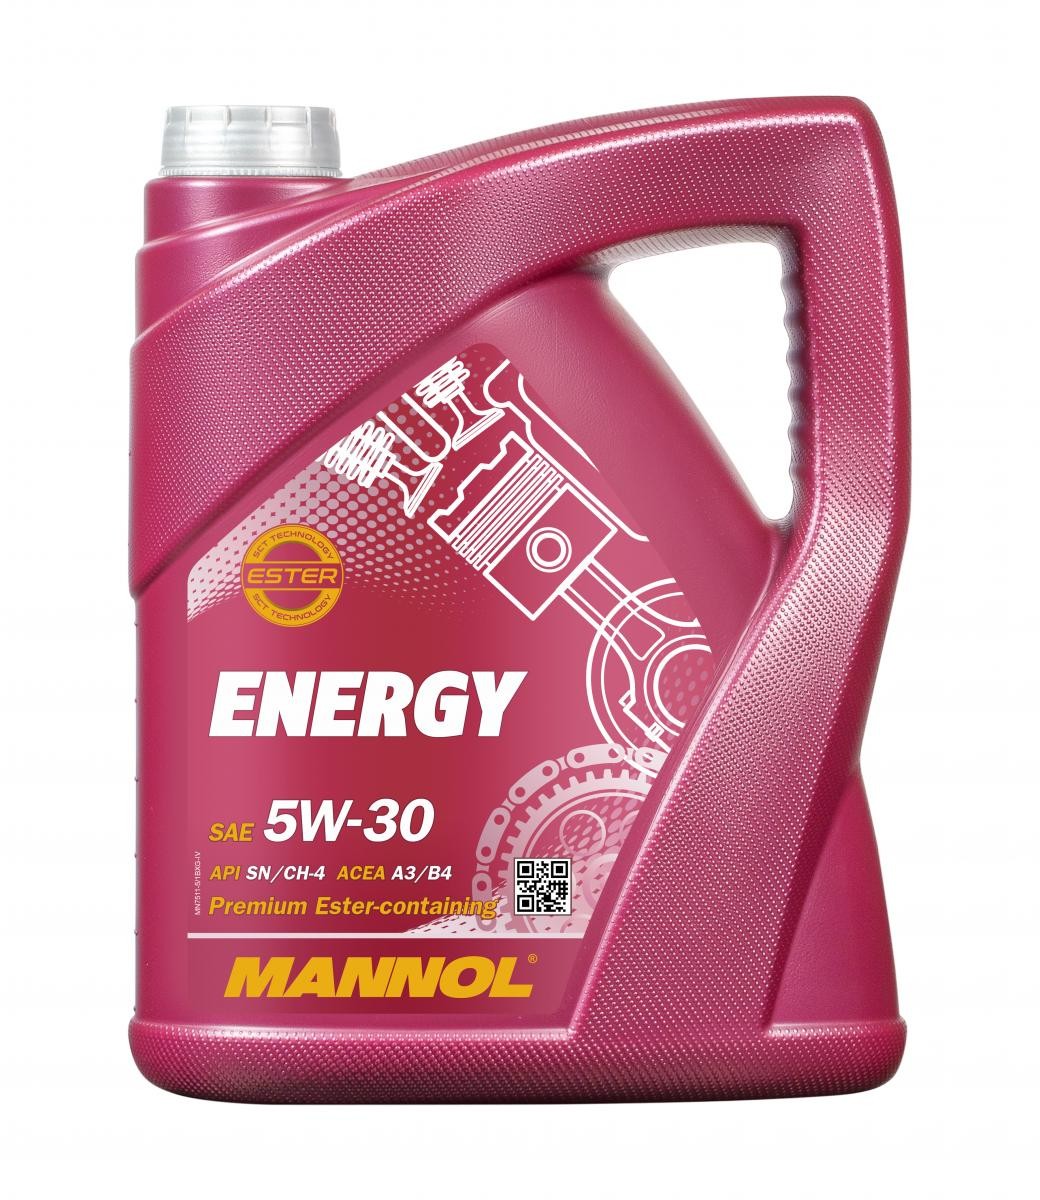 5W-30, 5l, Part Synthetic Oil from MANNOL - MN7511-5